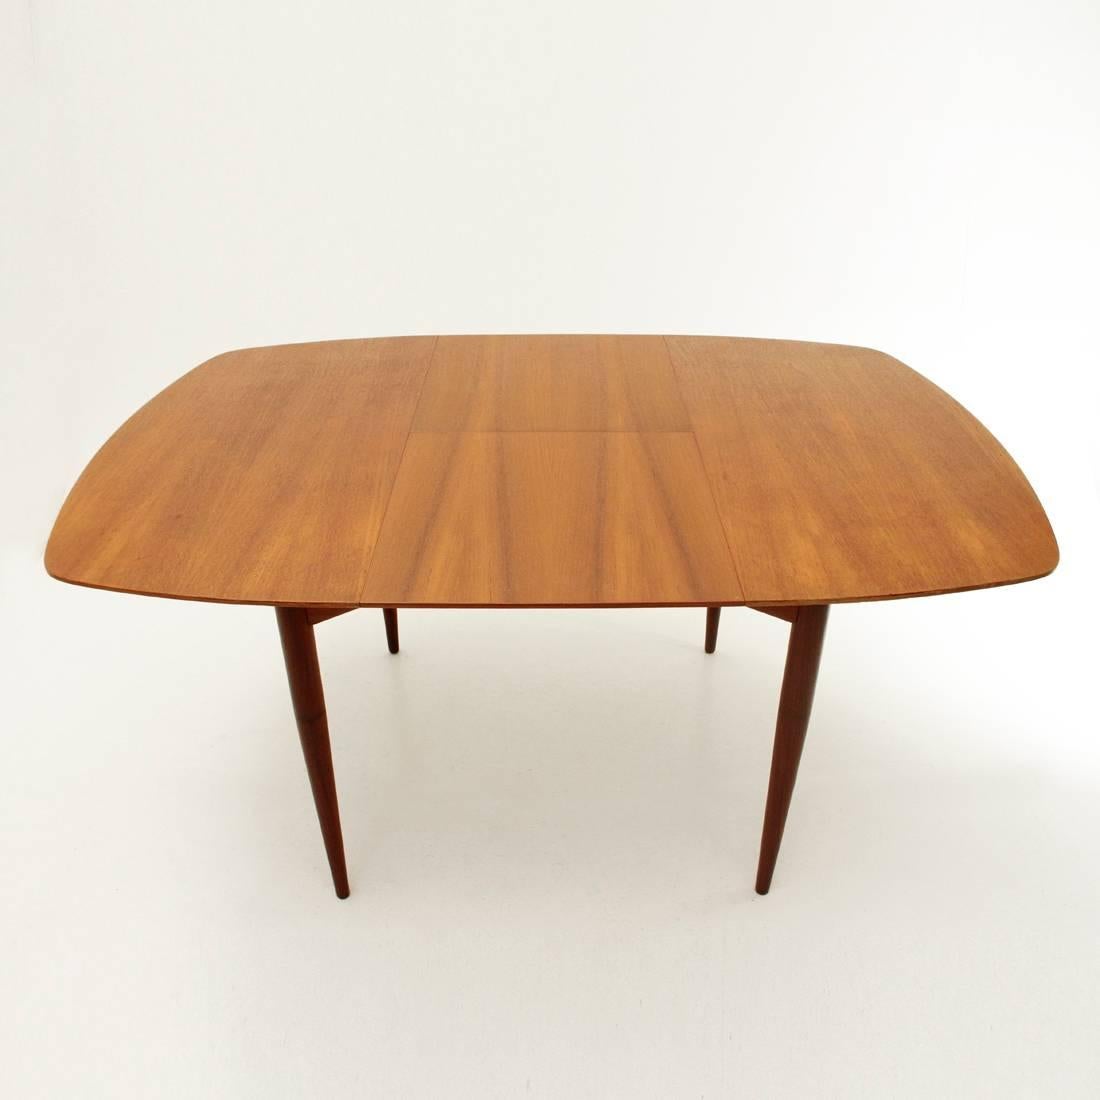 Mid-20th Century Italian Teak Extendable Dining Table with Brass Handle, 1950s